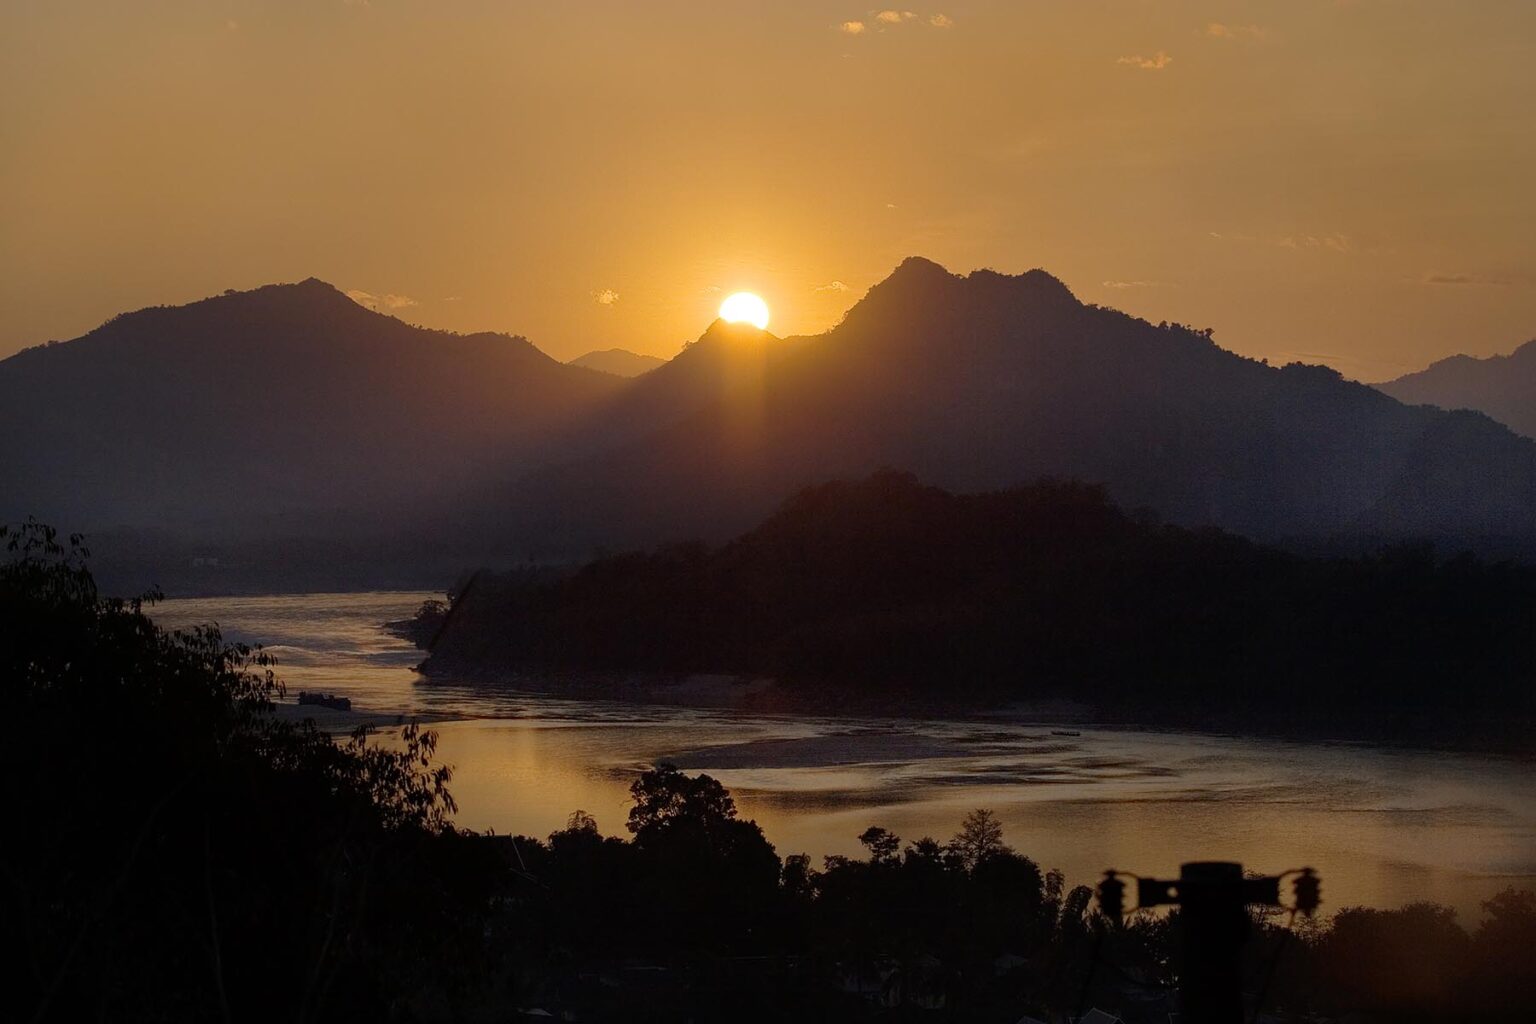 The sun sets over a hill on the Mekong River in the former Provincial town of LUANG PROBANG - LAOS